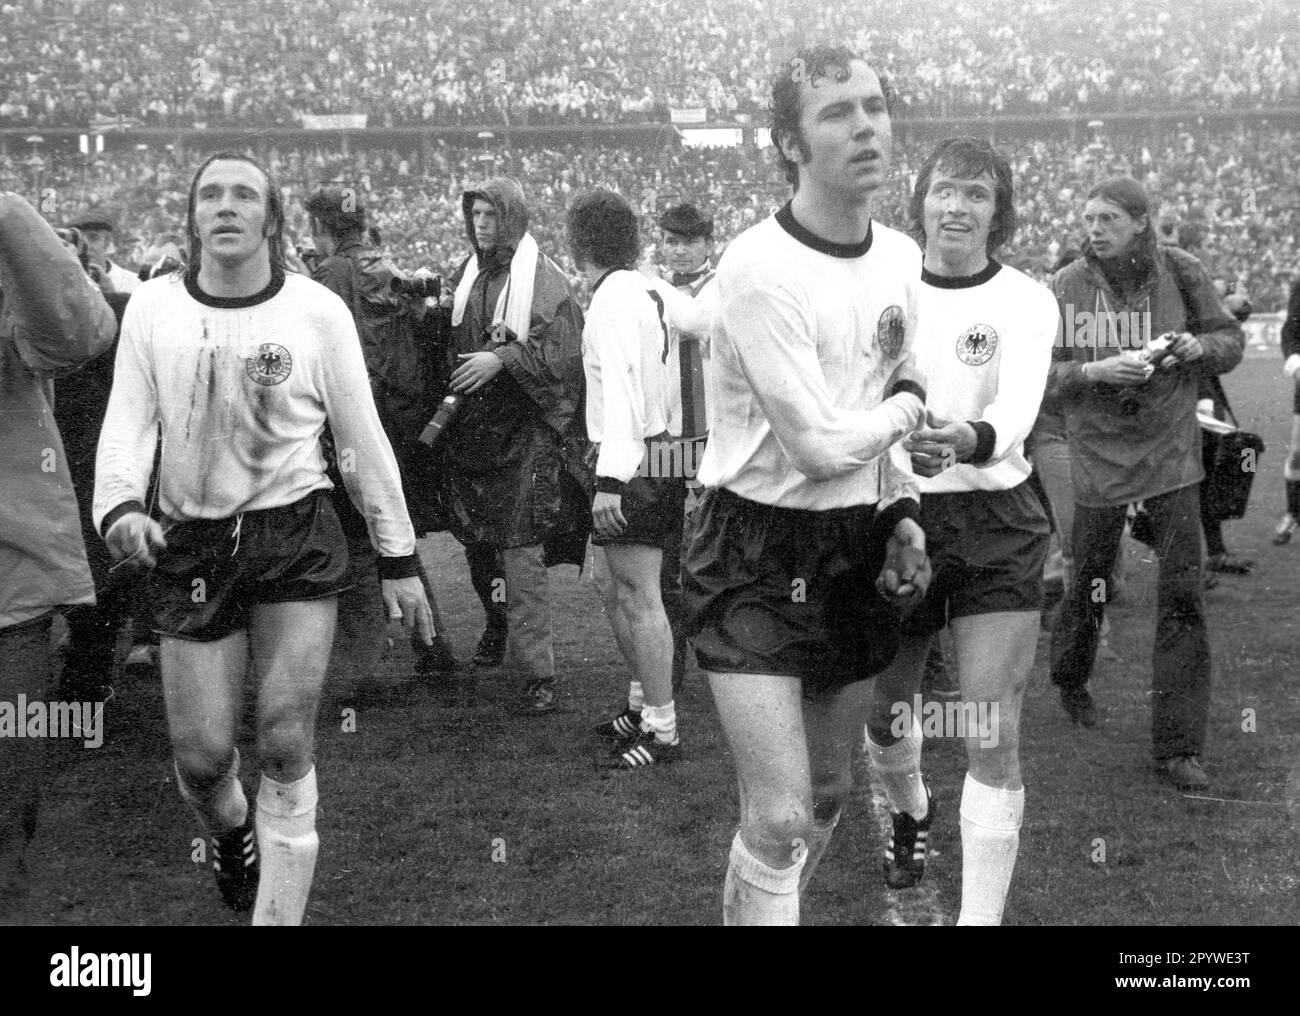 European Championship 1972. quarterfinal: Germany - England 0:0 / second leg in Berlin 13.05.1972. Exhausted but happy, the German players leave the lawn of the Olympic Stadium after the draw. From left: Günter Netzer, Franz Beckenbauer and Jupp Heynckes. [automated translation] Stock Photo